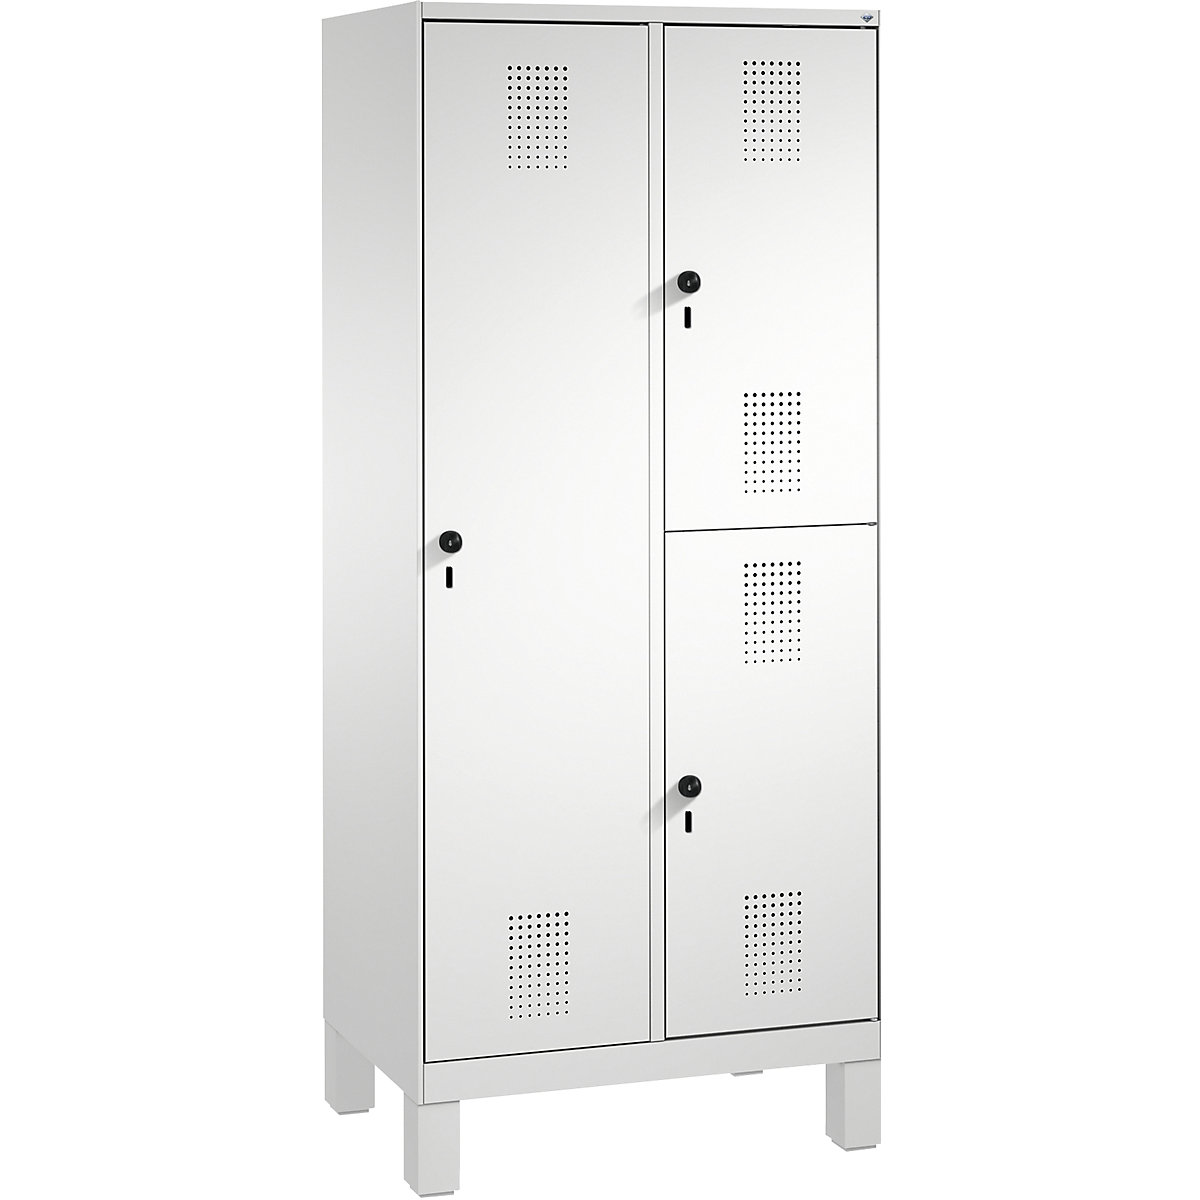 EVOLO combination cupboard, single and double tier – C+P, 2 compartments, 3 doors, compartment width 400 mm, with feet, light grey